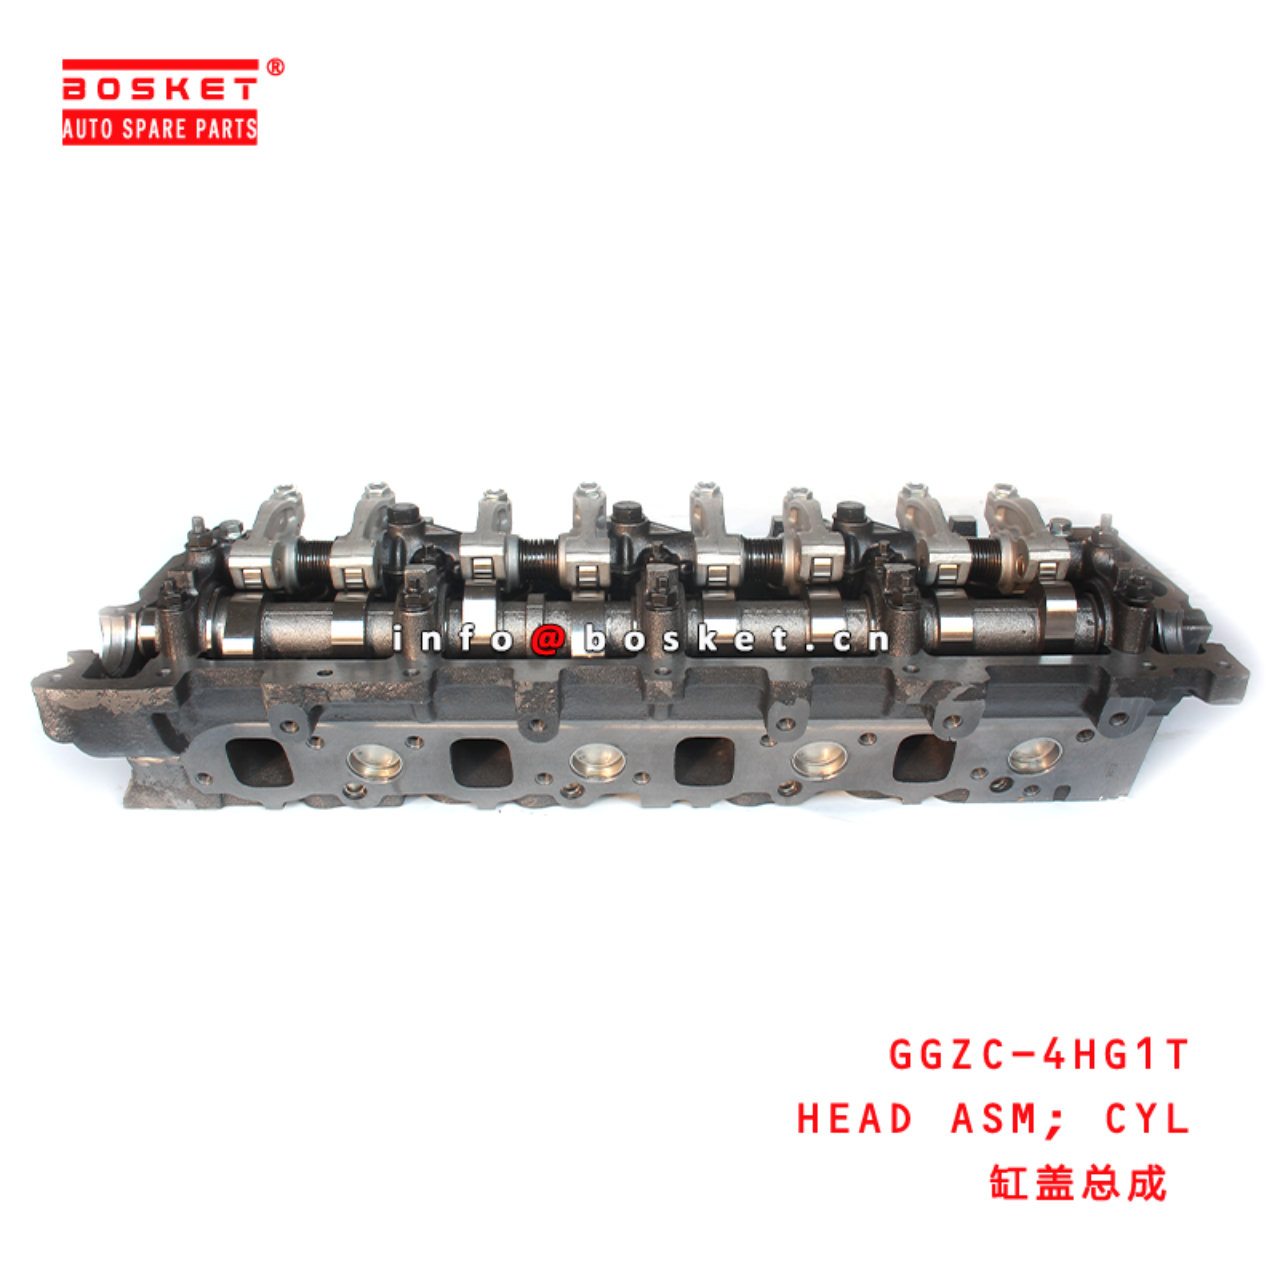 GGZC-4HG1T Cylinder Head Assembly suitable for ISUZU 4HG1T GGZC 4HG1T